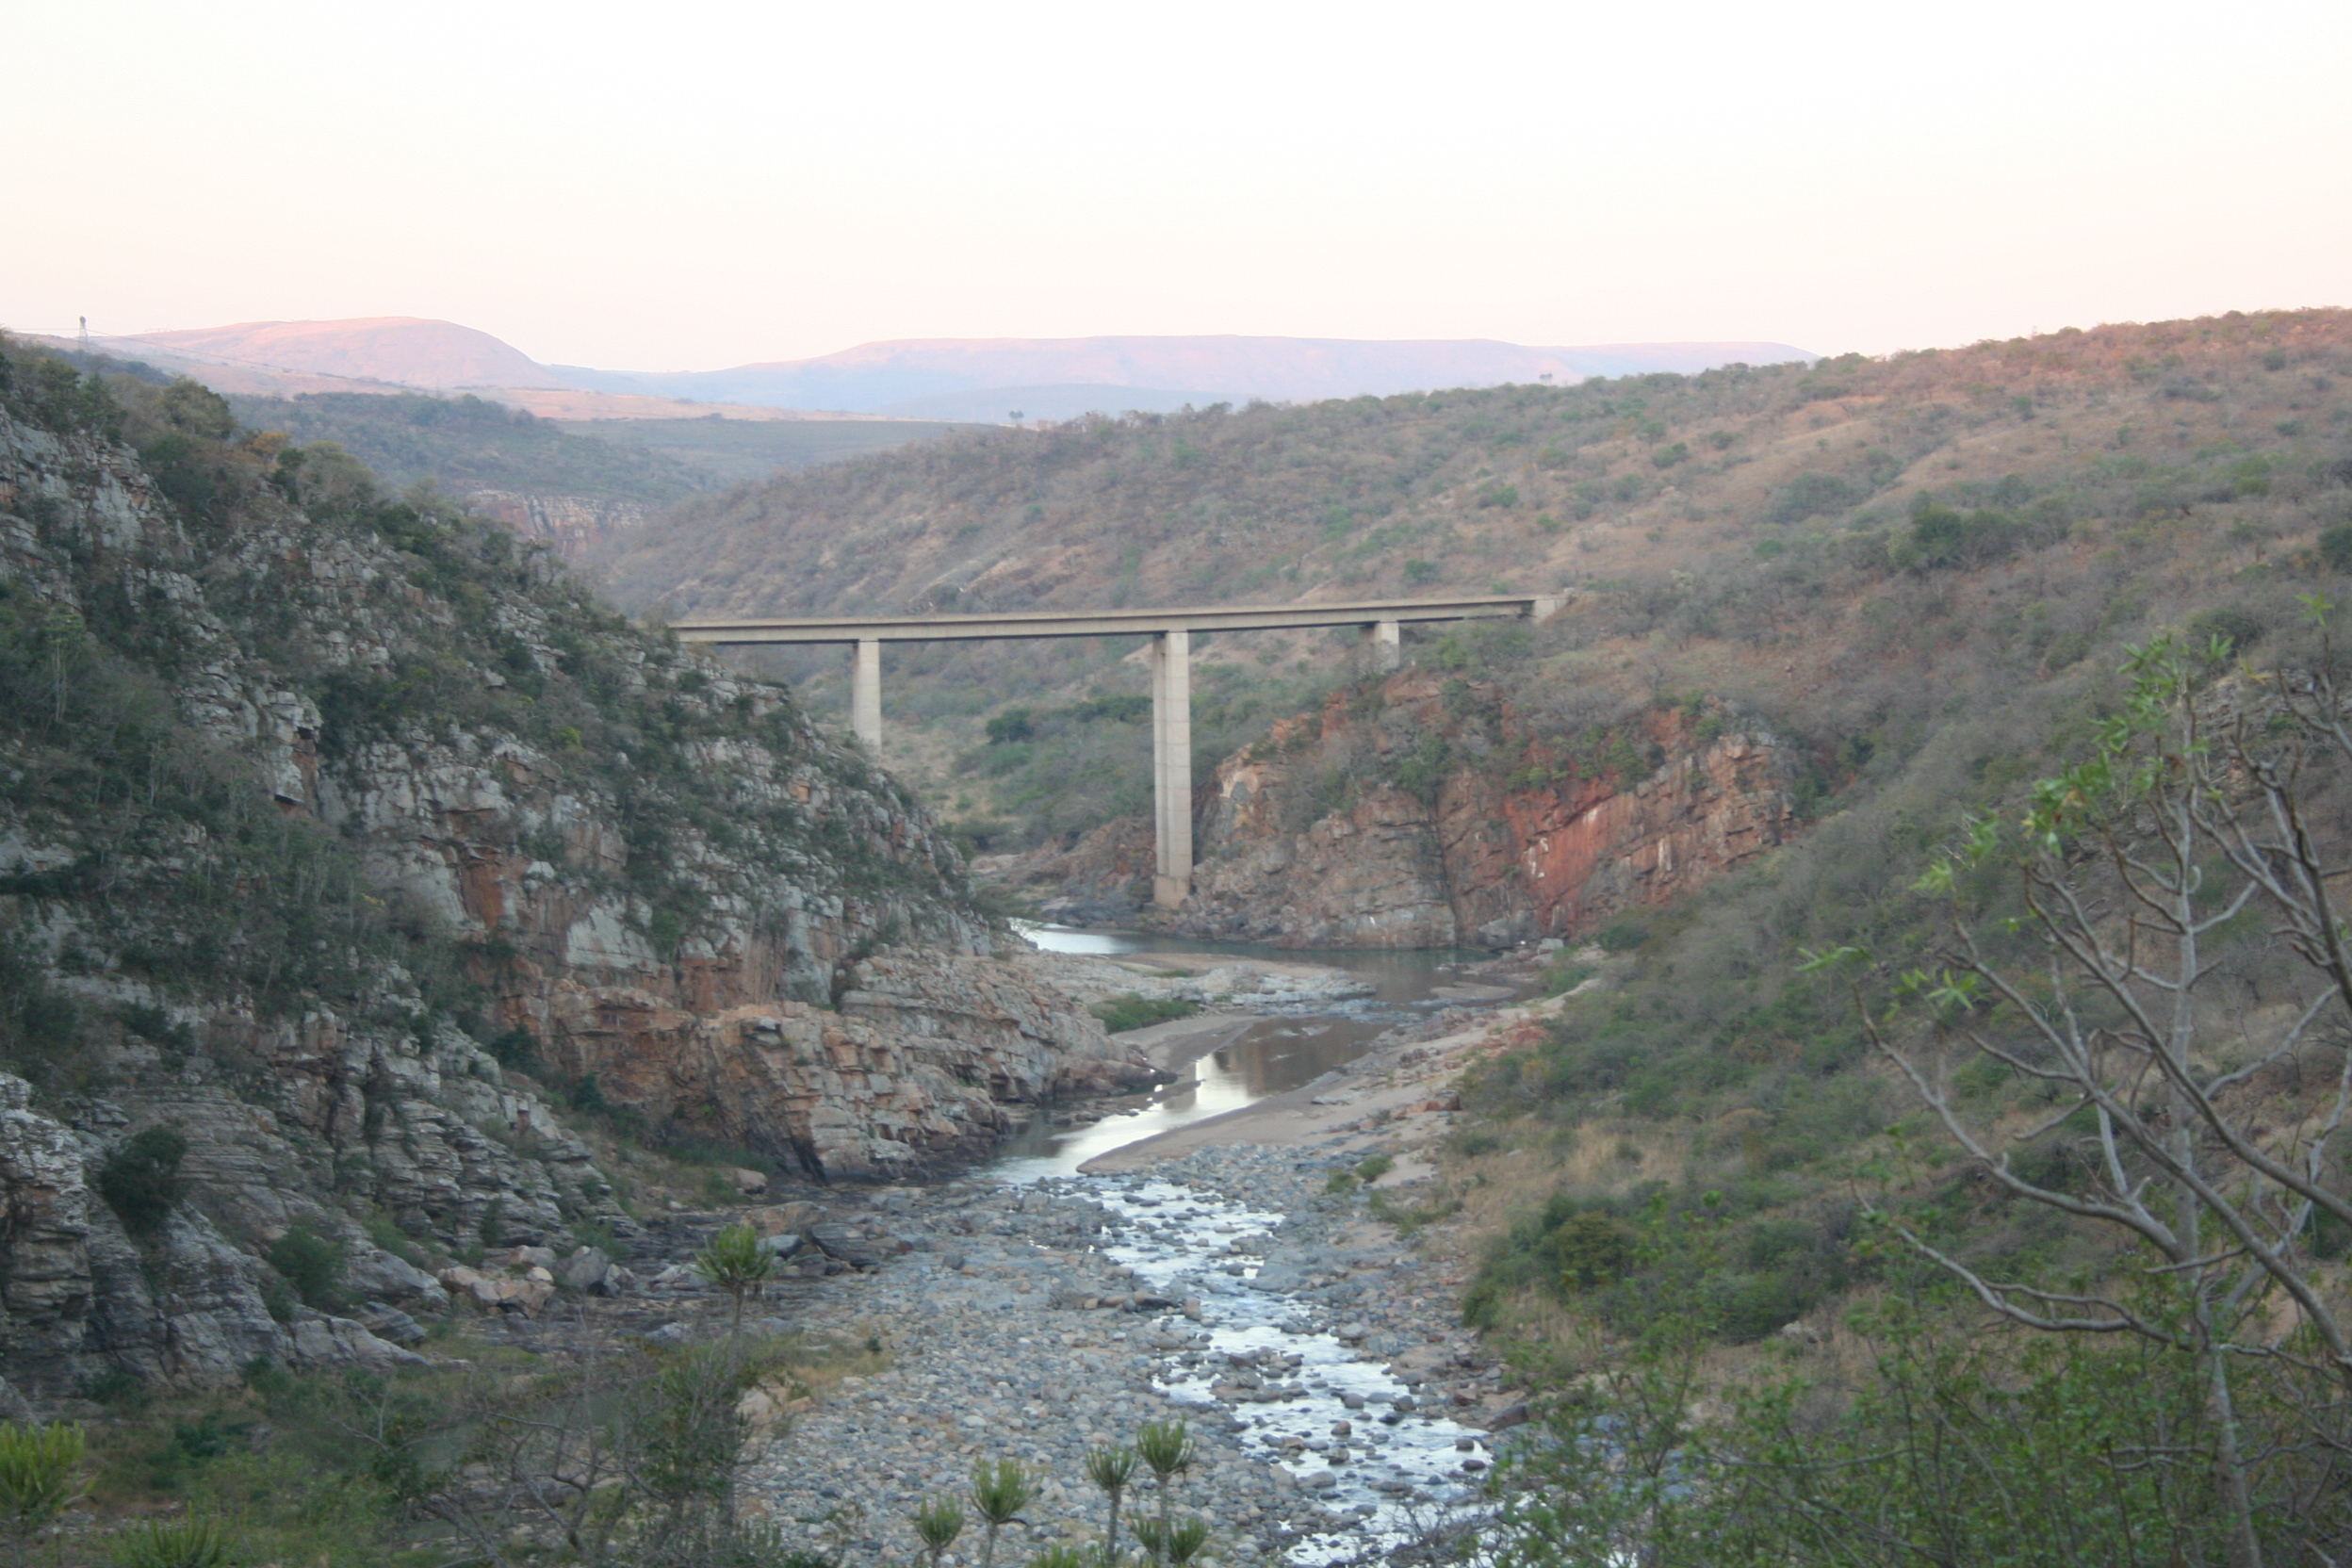 Dry grass valley with a bridge and small river